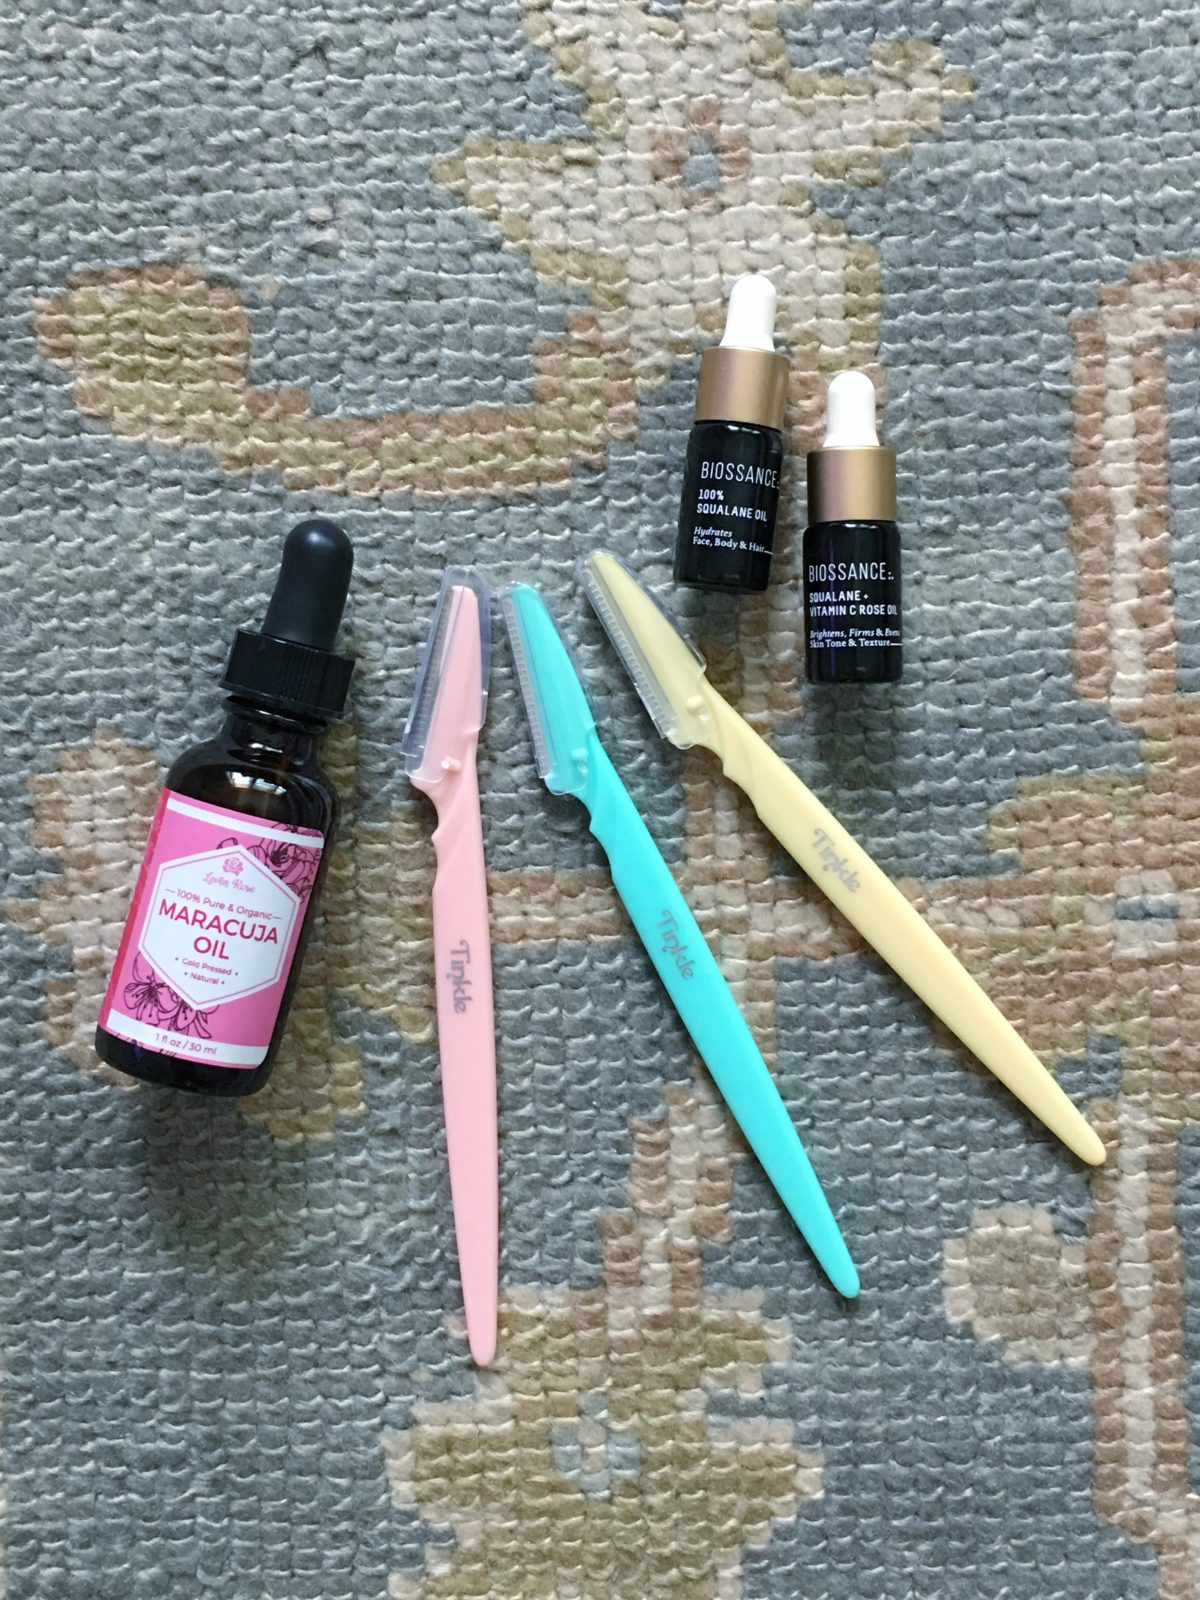 face shaving and face oils